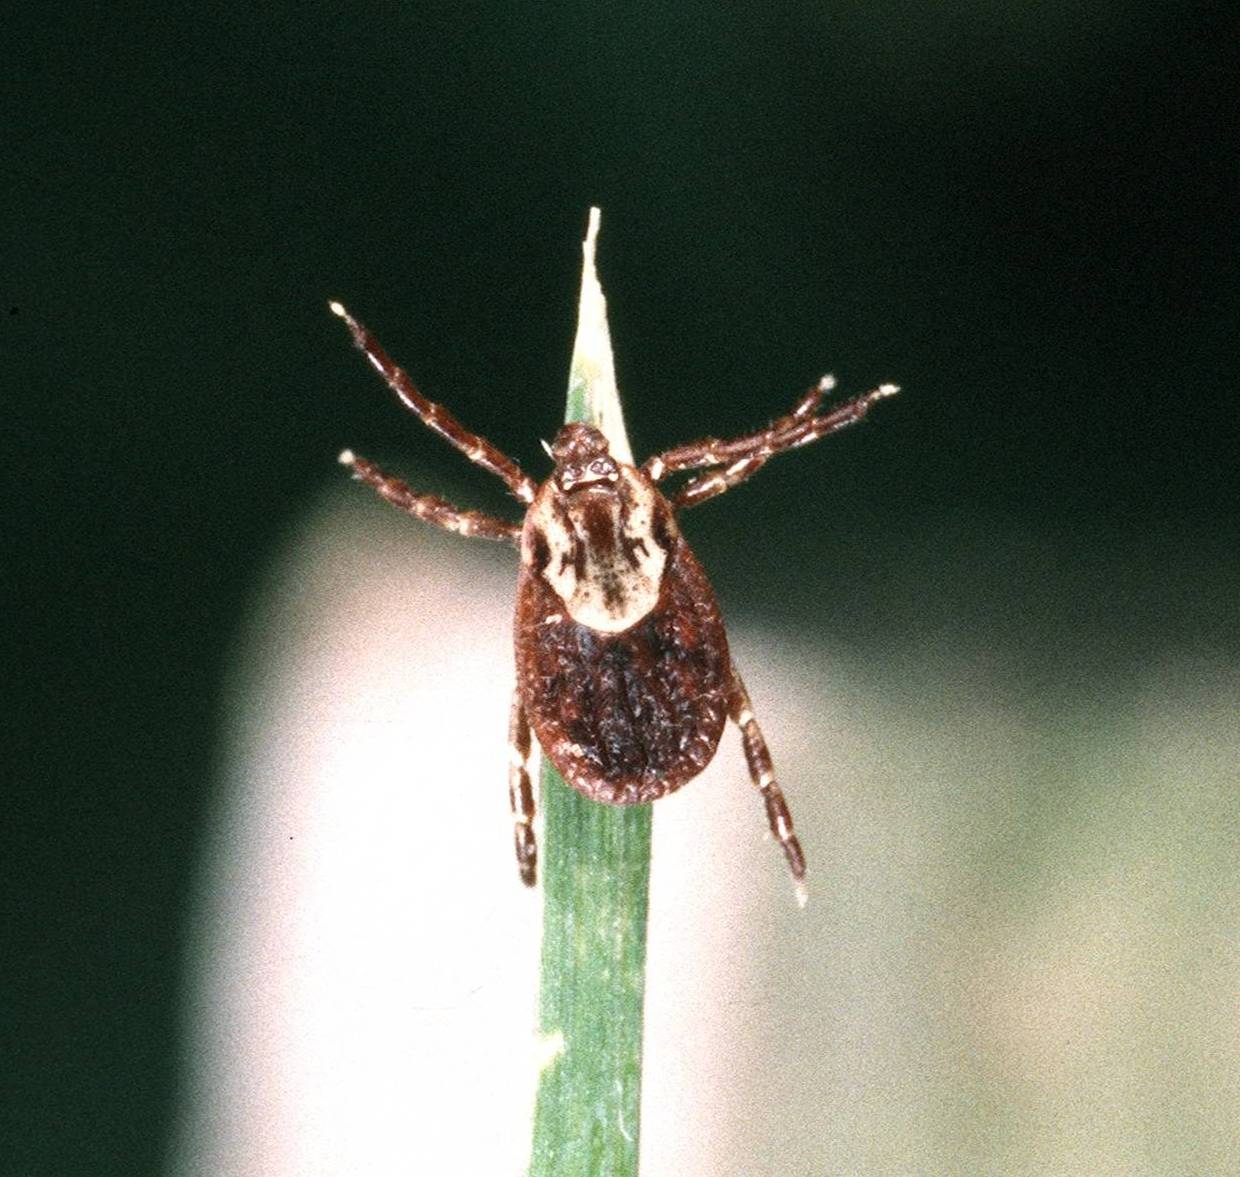 Fig. 8. Adult tick "questing" by waiting on vegetation for a passing host